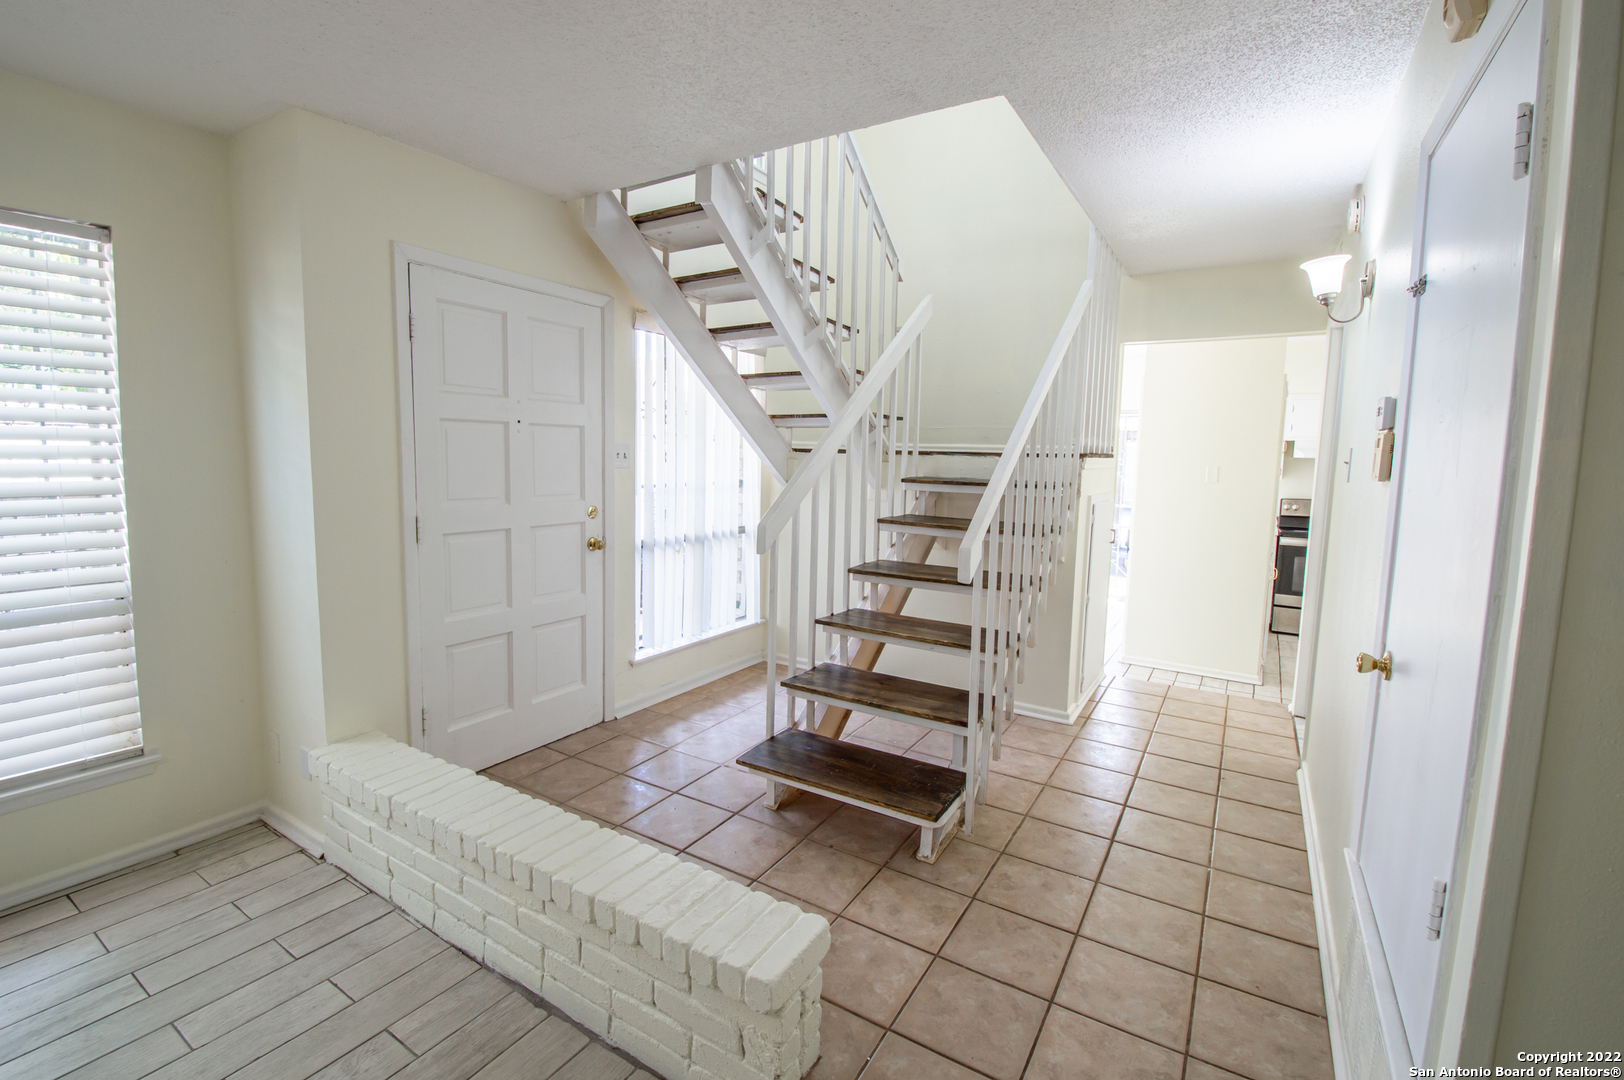 Come check out this condo in a great location! Perfect for entry-level home ownership.  The condo is within walking distance to HEB and right off I-10 highway and Wurzbach. CLOSE TO MEDICAL CENTER in Gated Community, 24/7 camera surveillance, 2 Assigned Parking, and 2 storage for each Unit. HOA includes Water, Trash, and Landscaping   The condo is 1148 sqft. Two stories with a contemportay staircase with 2 bedrooms and 1.5 half baths situated on the Northside of San Antonio and conveniently located to Northstar Mall, The Shops at La Cantera, Six Flags Fiesta Texas, fine dining, and downtown San Antonio.